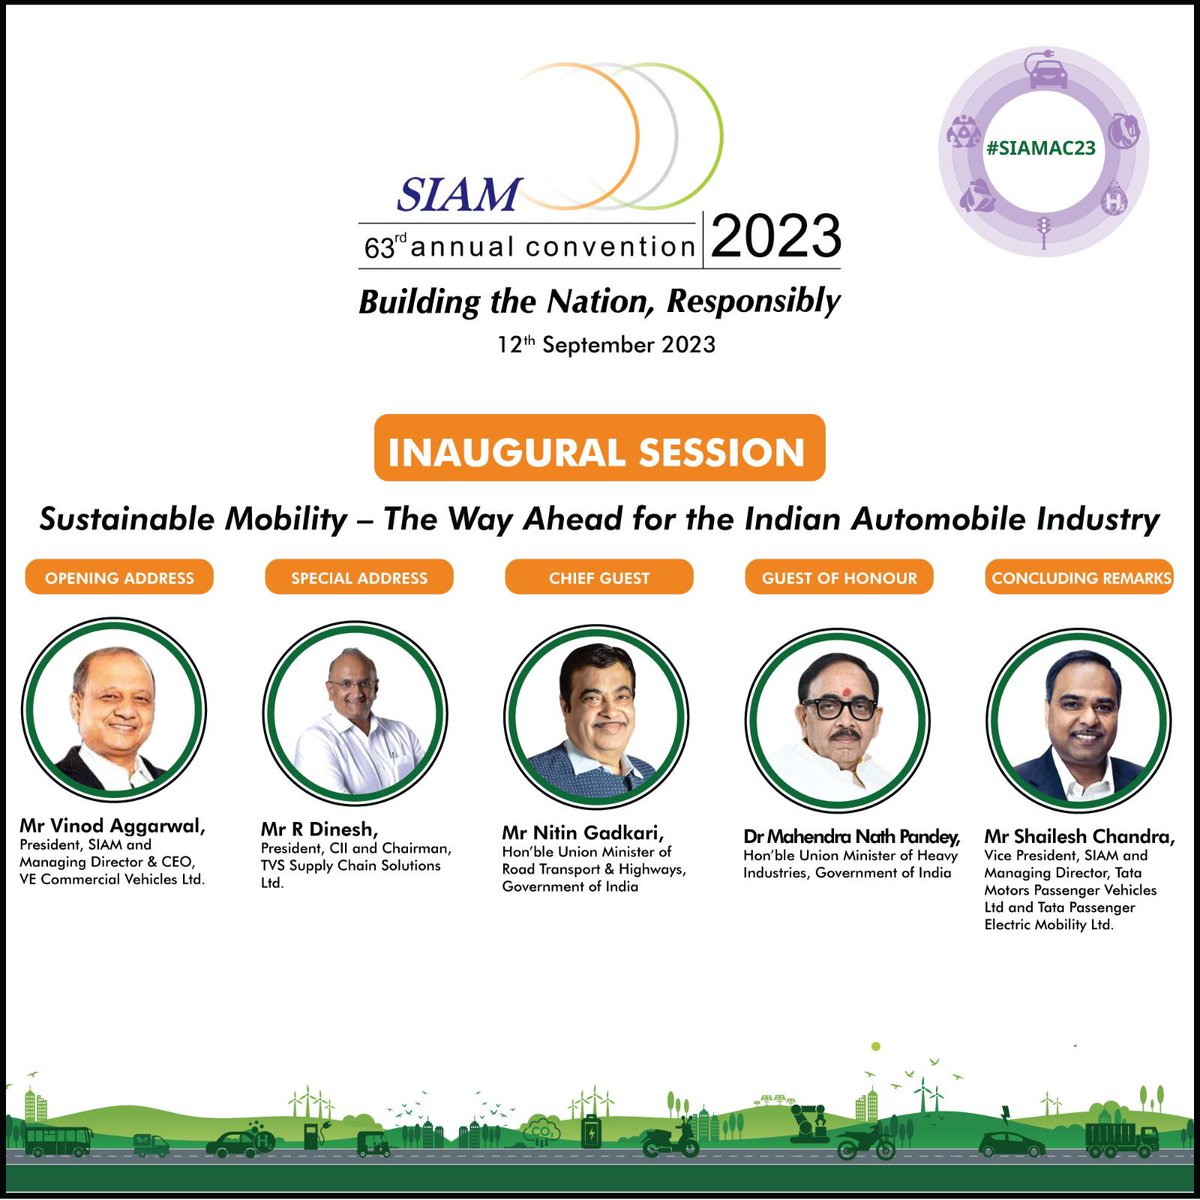 At the Inaugural Session of SIAM Annual Convention 2023, our esteemed Chief Guest Shri Nitin Gadkari, Hon’ble Union Minister of Road Transport & Highways, and Guest of Honour Dr. Mahendra Nath Pandey, Hon’ble Union Minister of Heavy Industries, will be joined by leading…